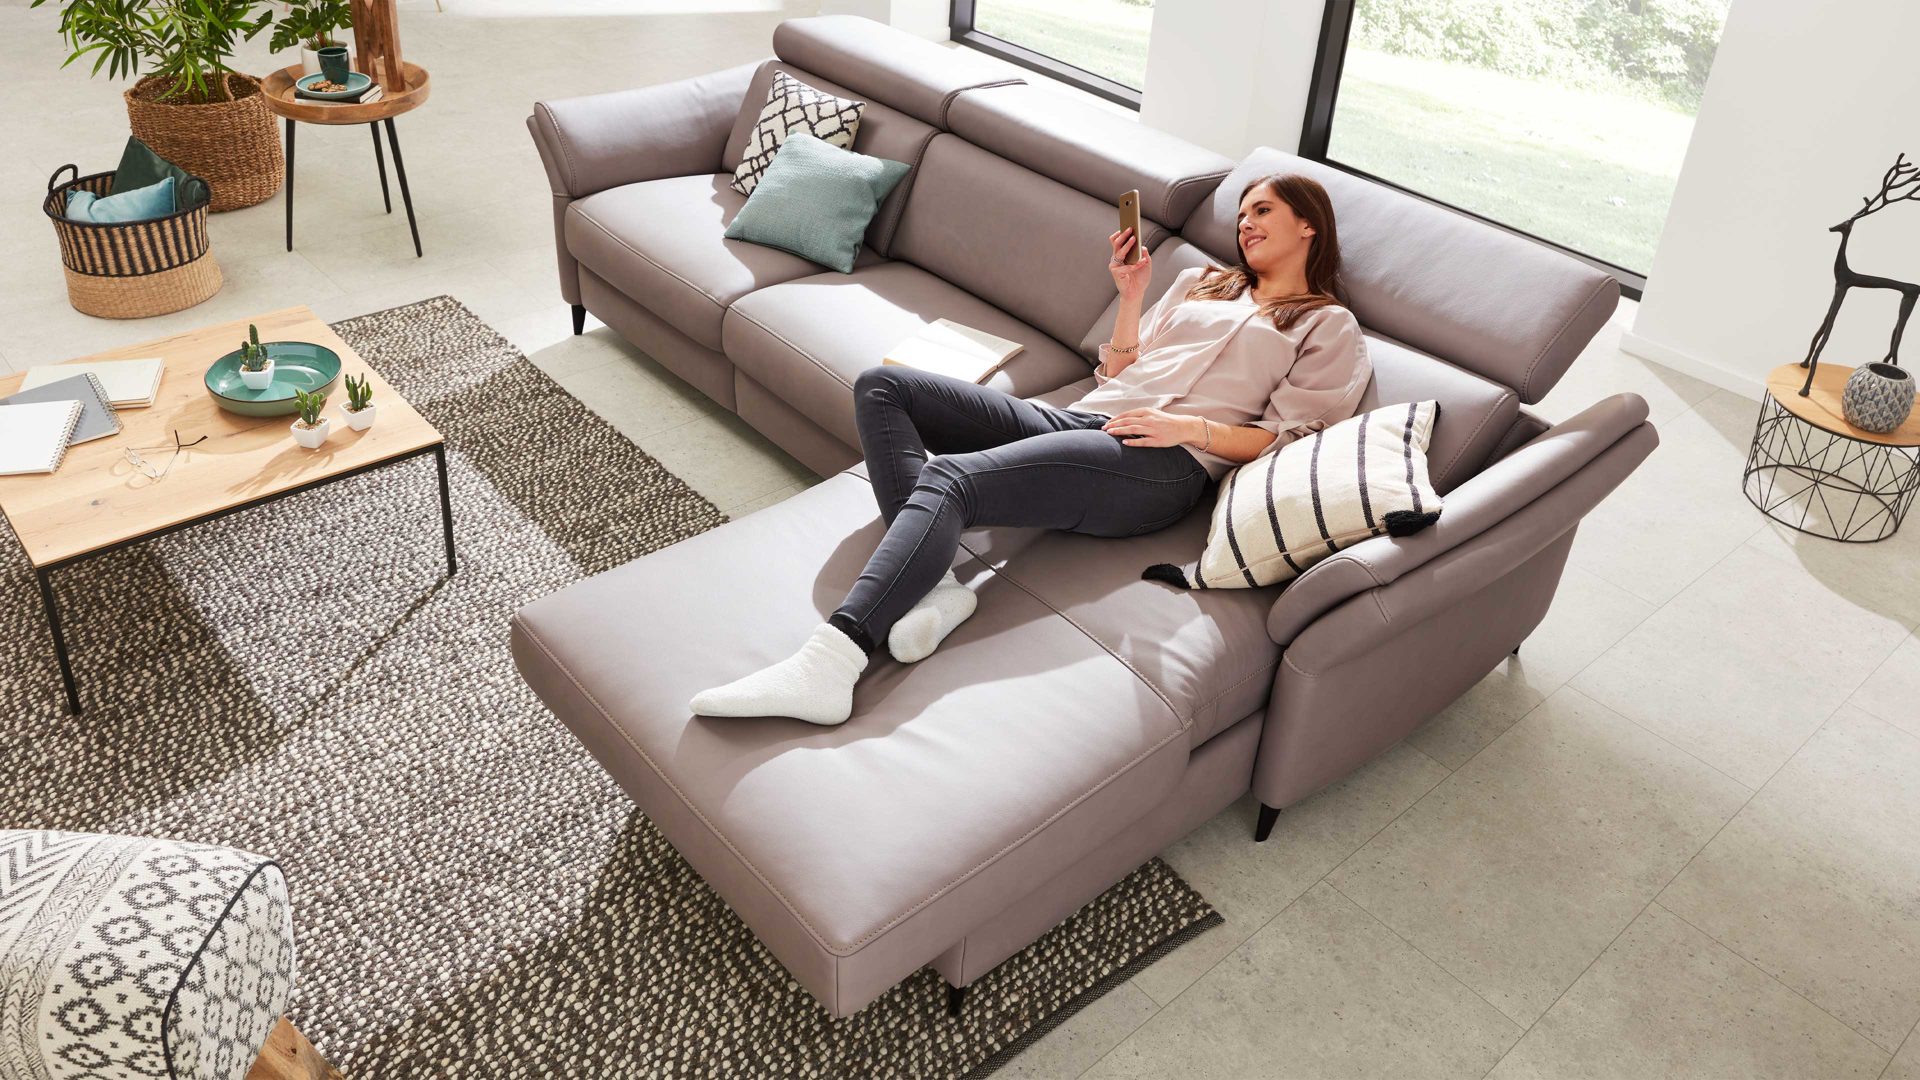 - Sofa Serie einmotorige 4055 MoLi, Interliving Relaxfunktion Relaxfunktion